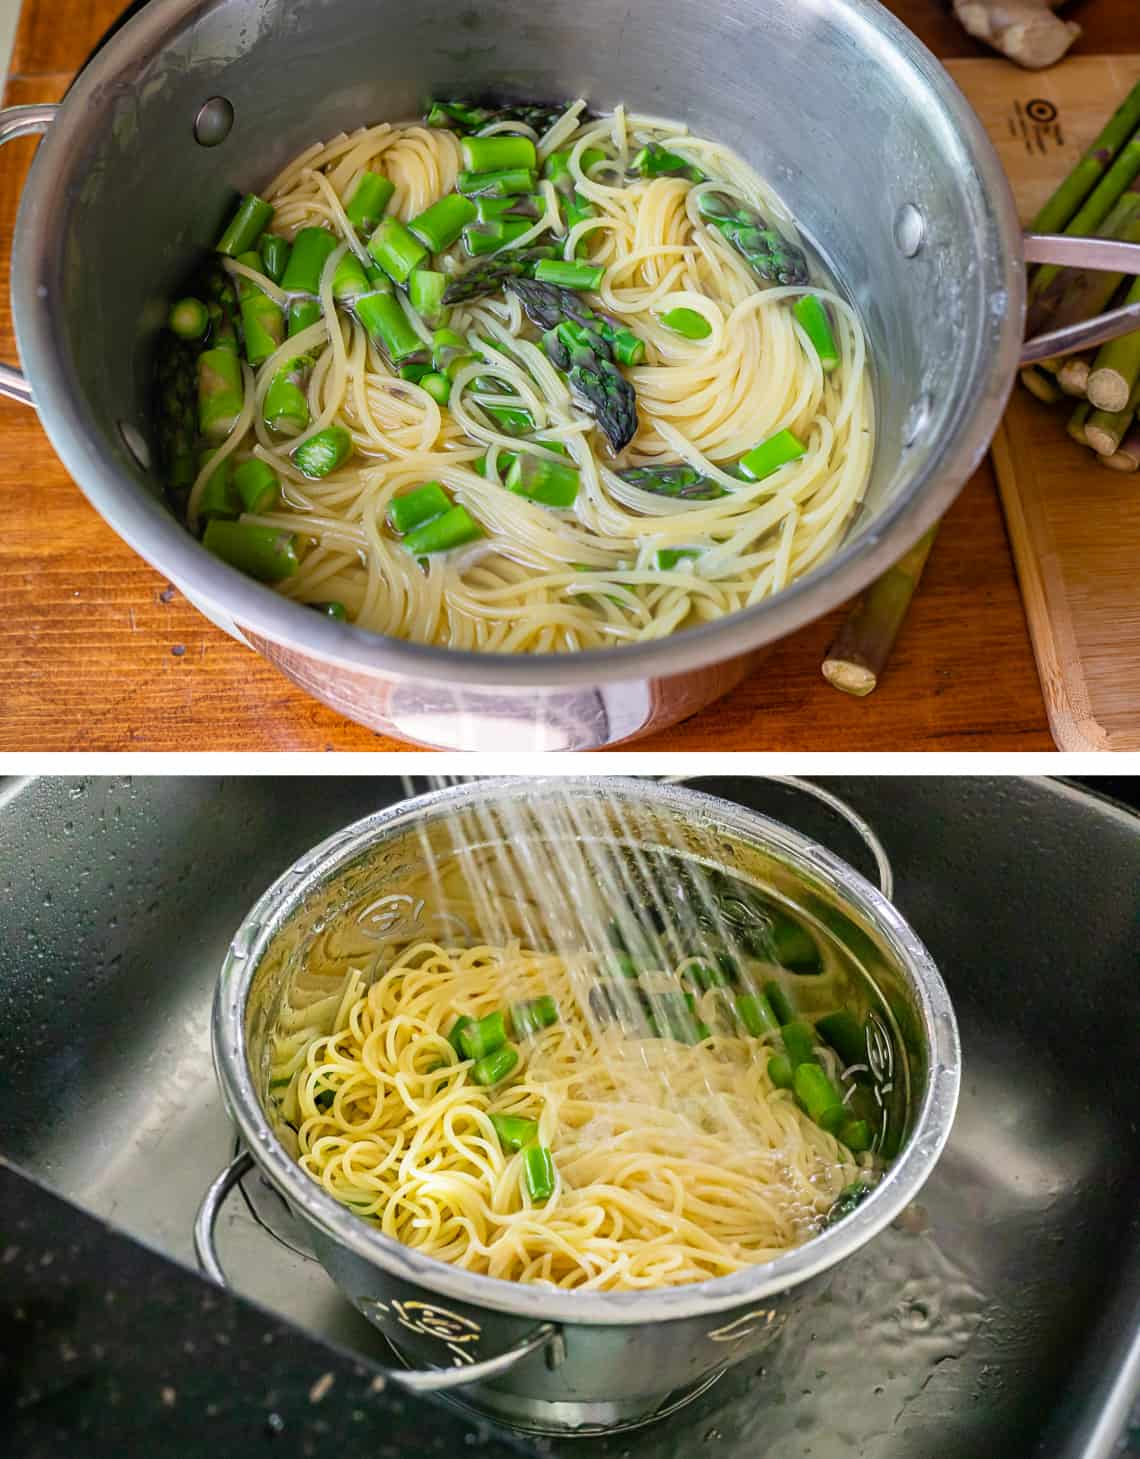 cooked noodles and veggies in a pot, then in strainer being rinsed with some water.